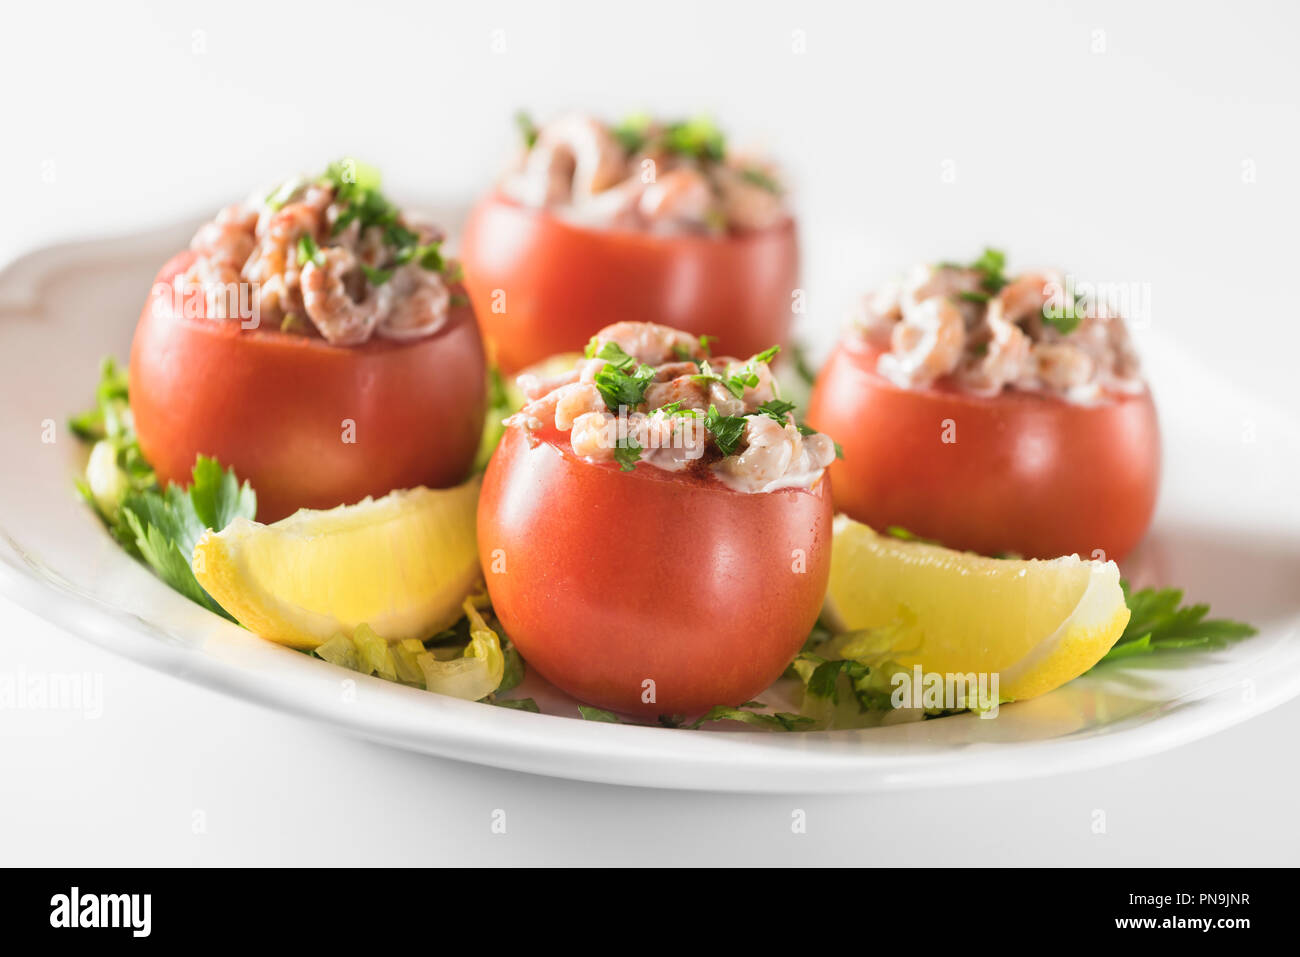 Tomates aux crevettes. Tomatoes filled with prawns. Belgium Food Stock Photo